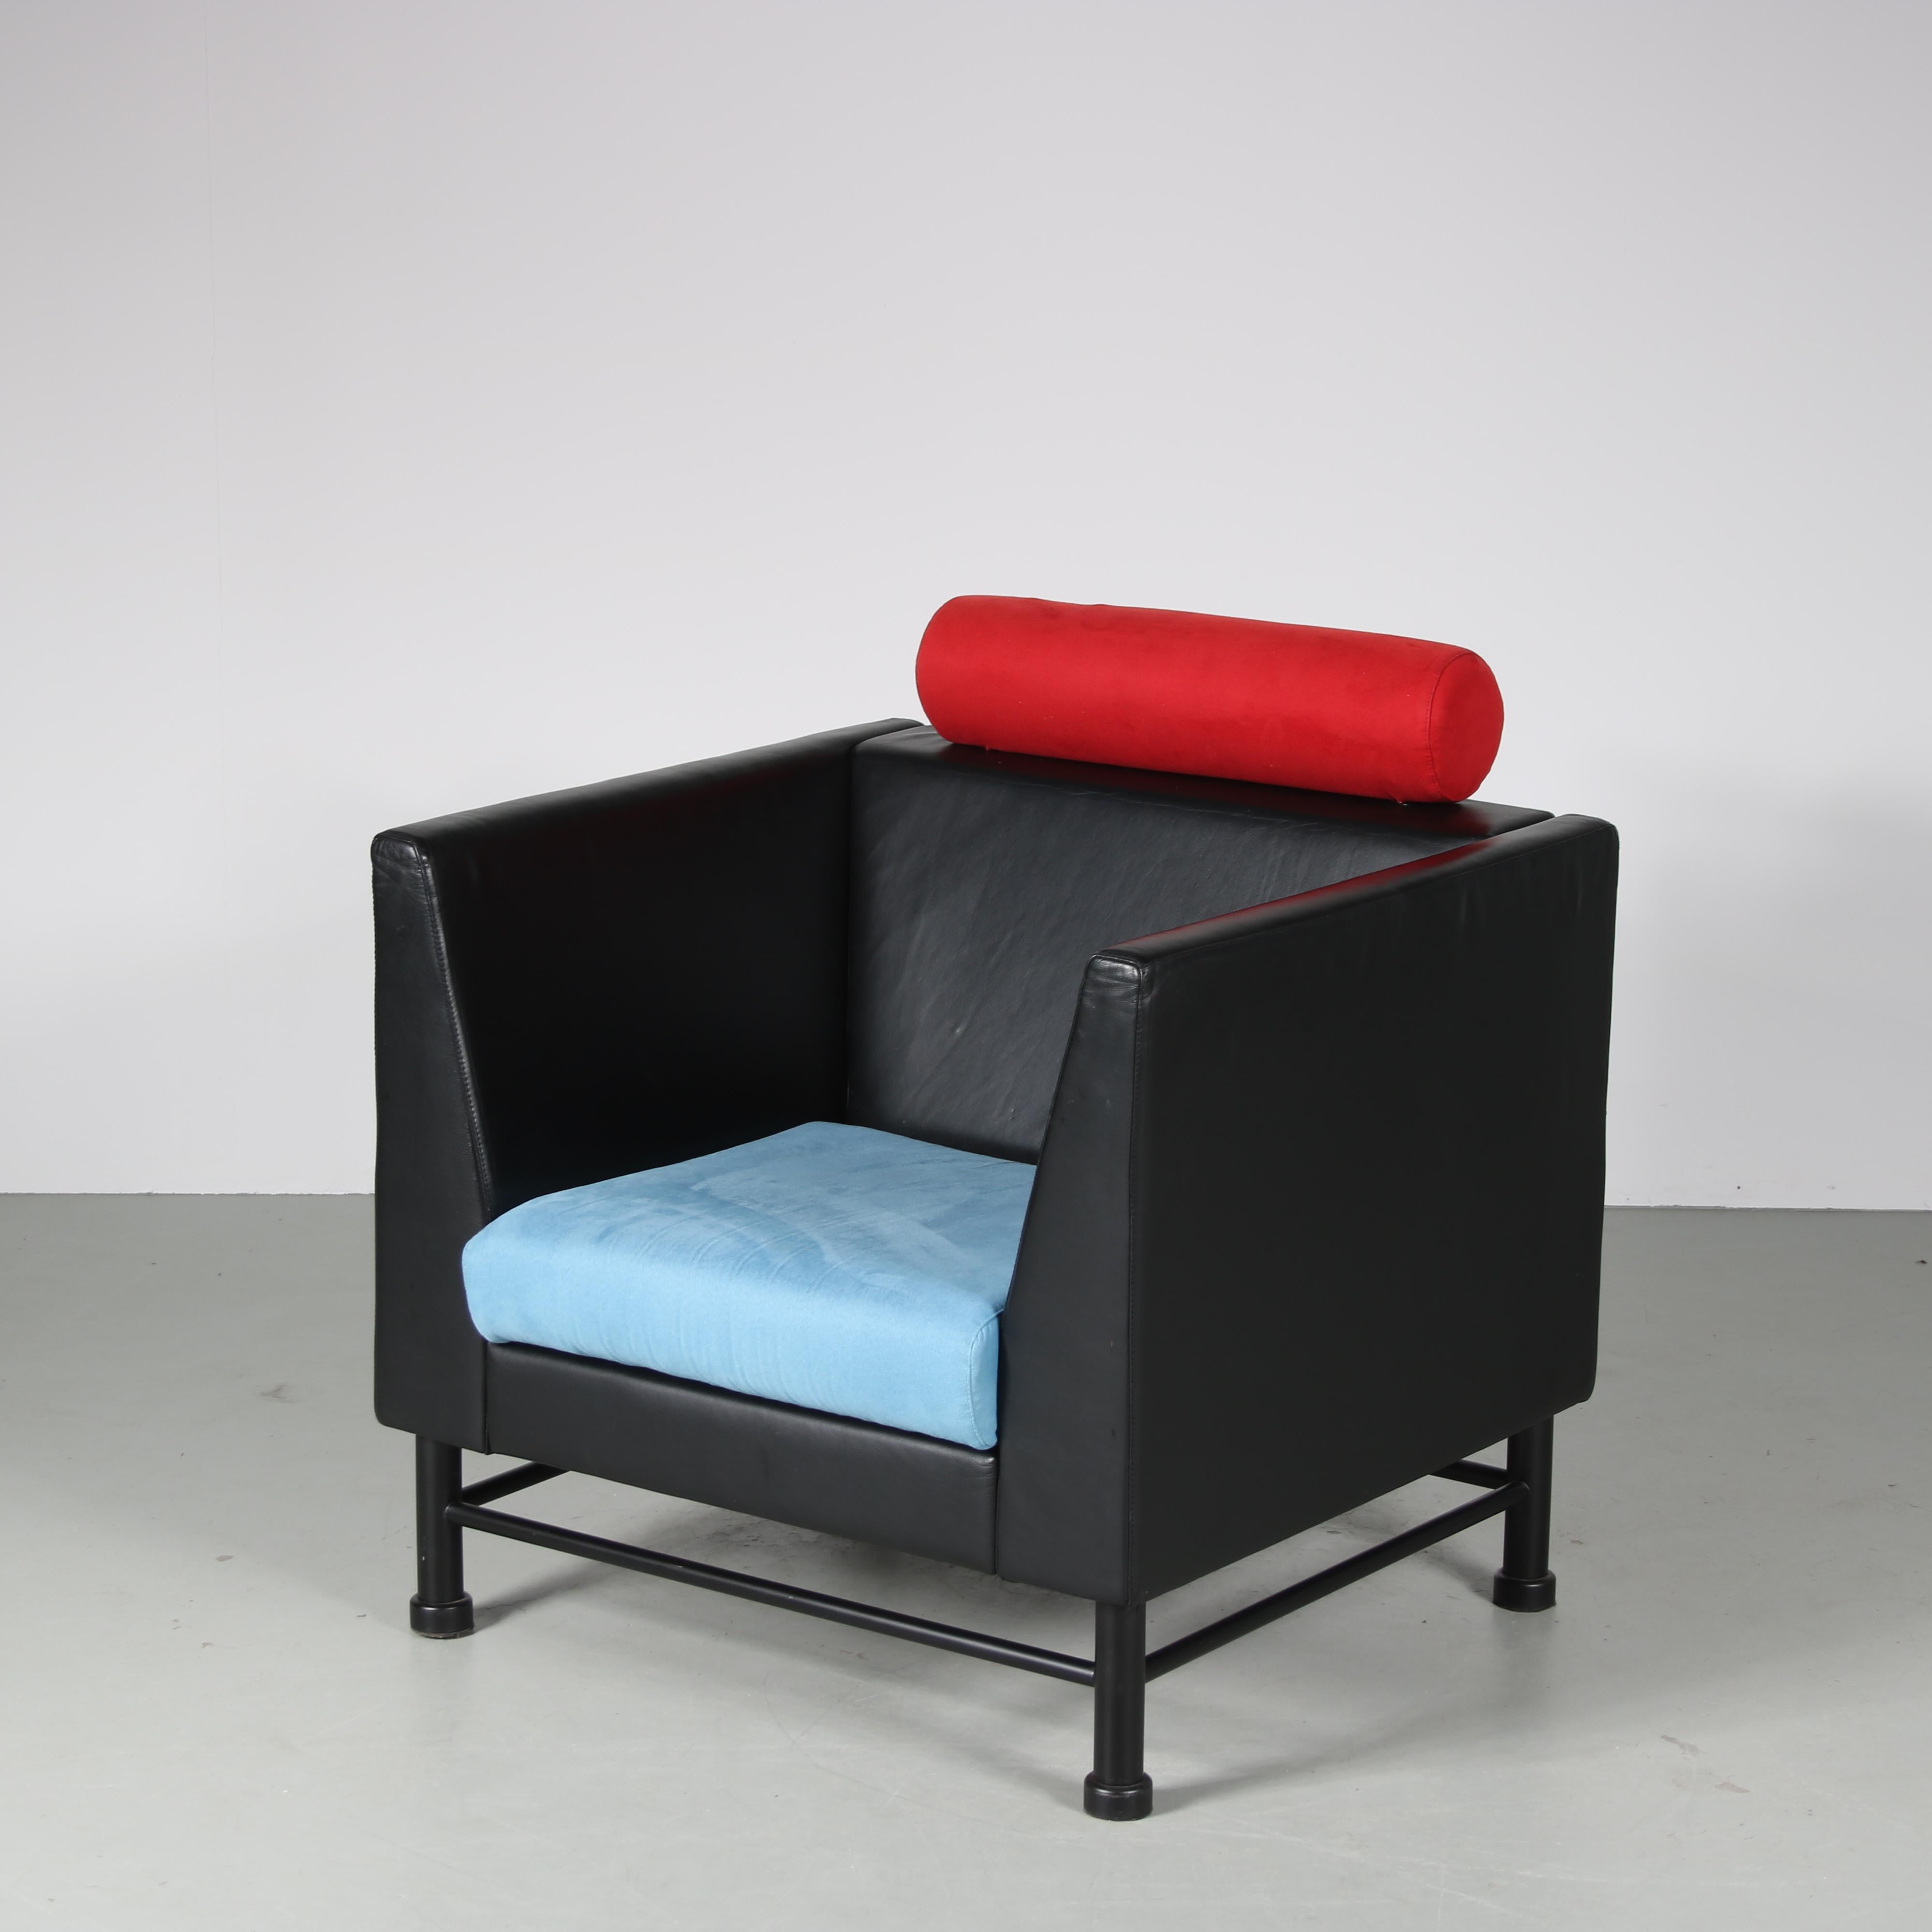 Leather Pair of “East Side” Chairs by Ettore Sottsass for Knoll International, USA, 1980